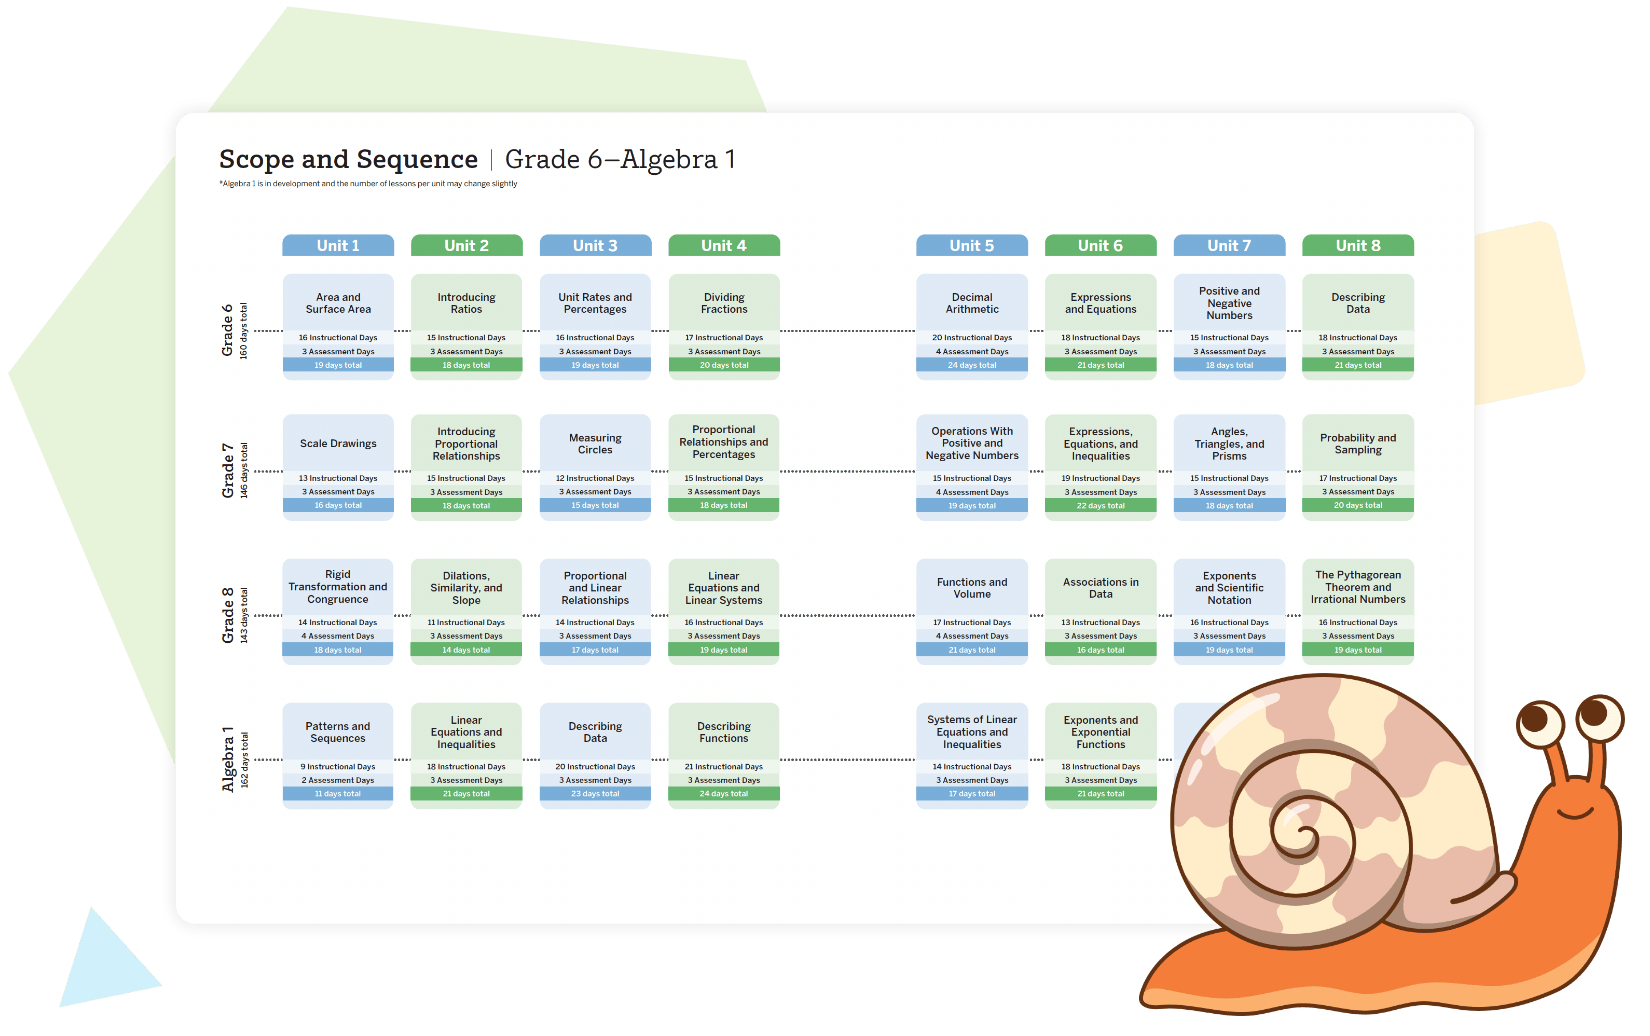 Illustration of a New York math curriculum map for grade 6-algebra 1, divided into 8 units with topics and a cartoon snail next to it.